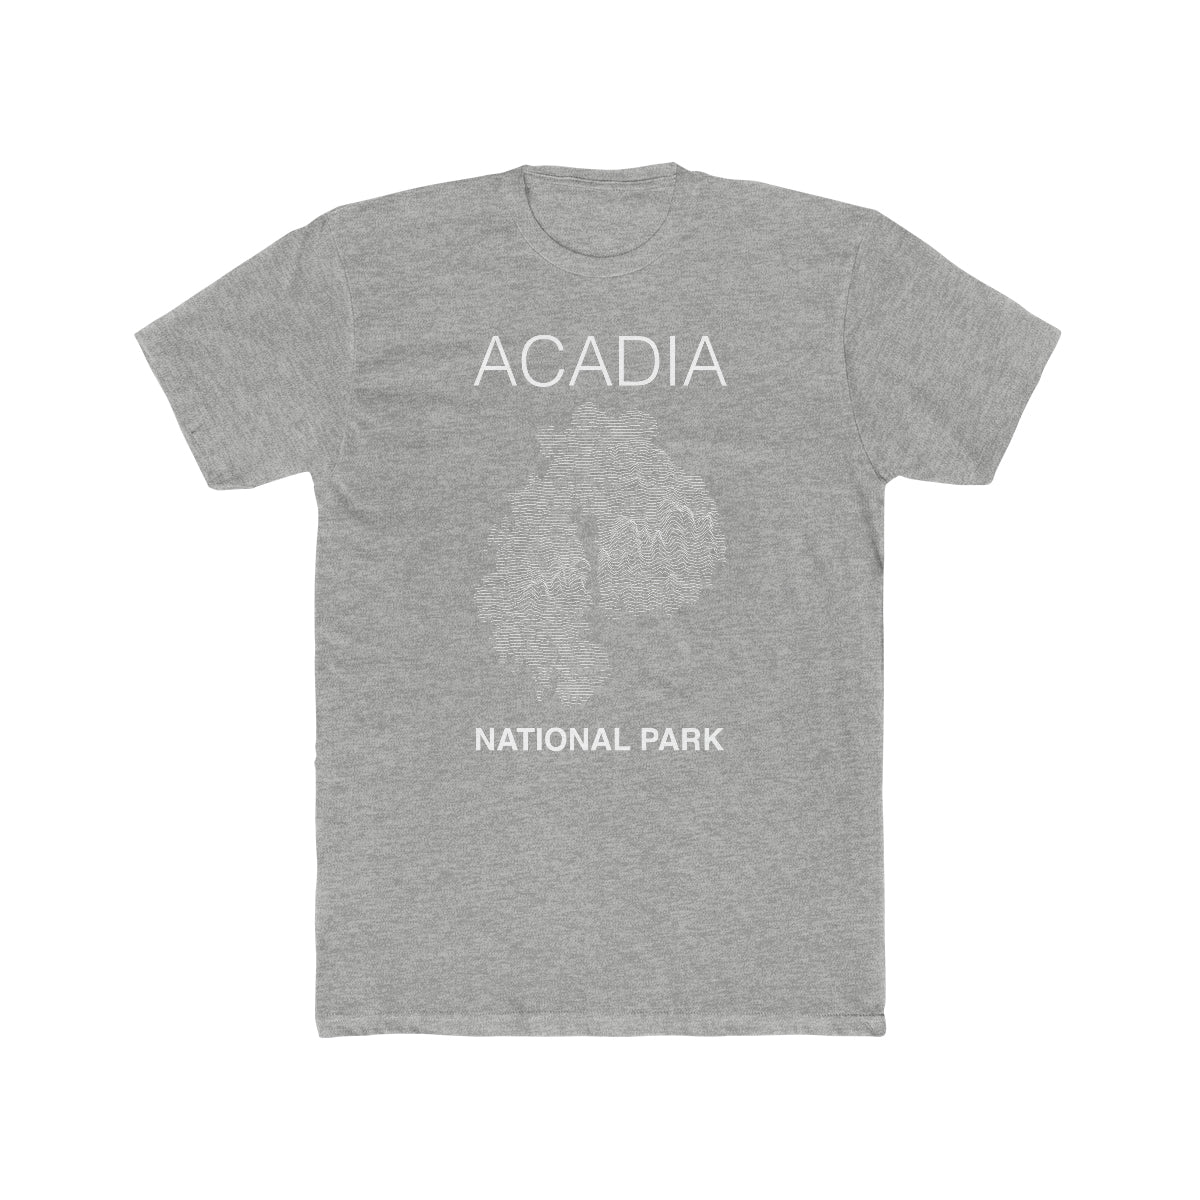 Mount Desert Island and Acadia National Park T-Shirt Lines